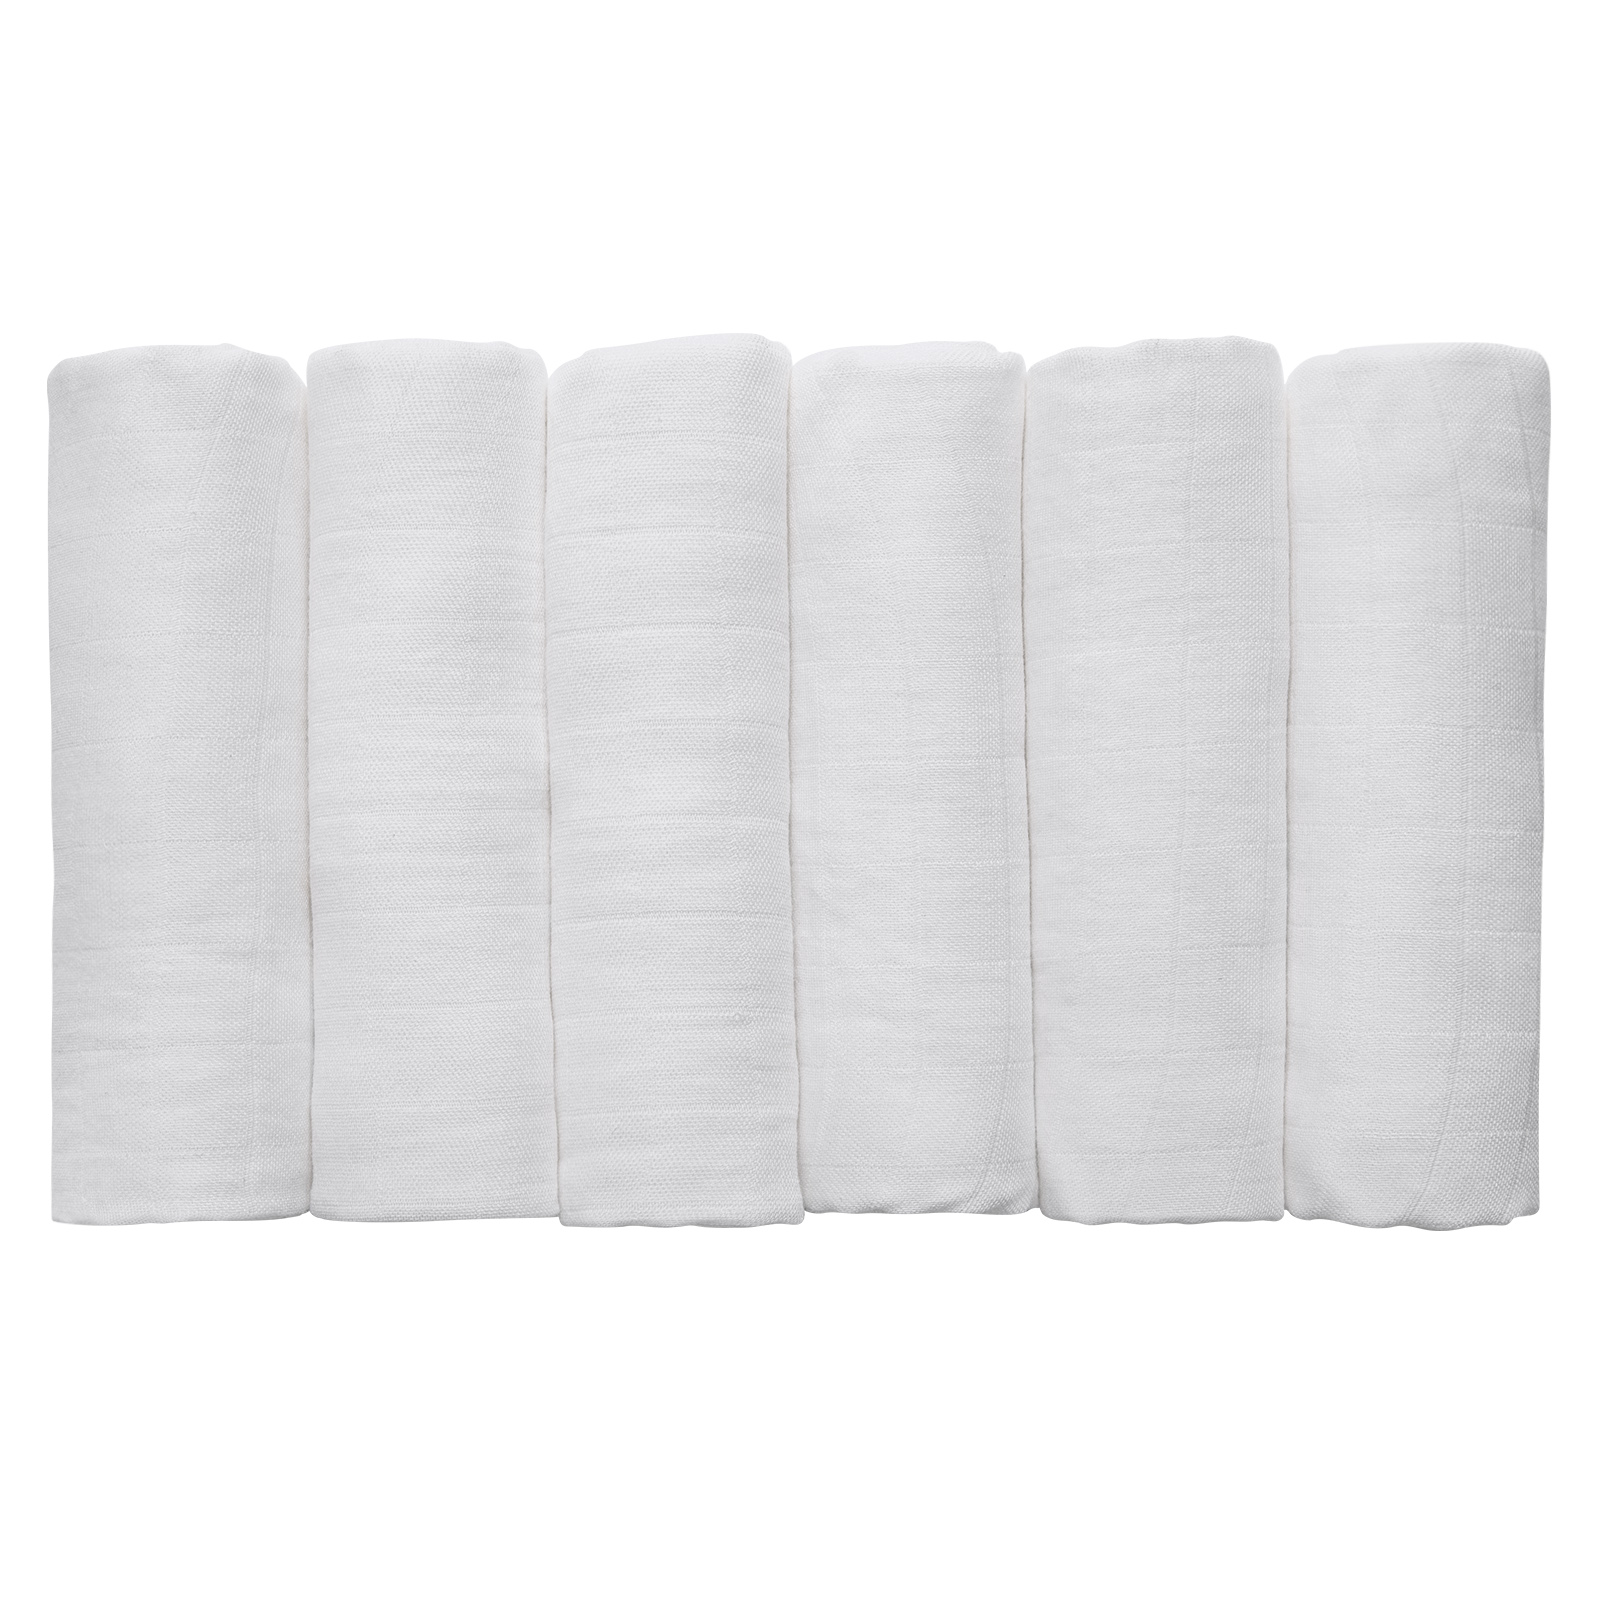 Muslin Swaddle Blankets 6-Pack, 28 X 28" - White